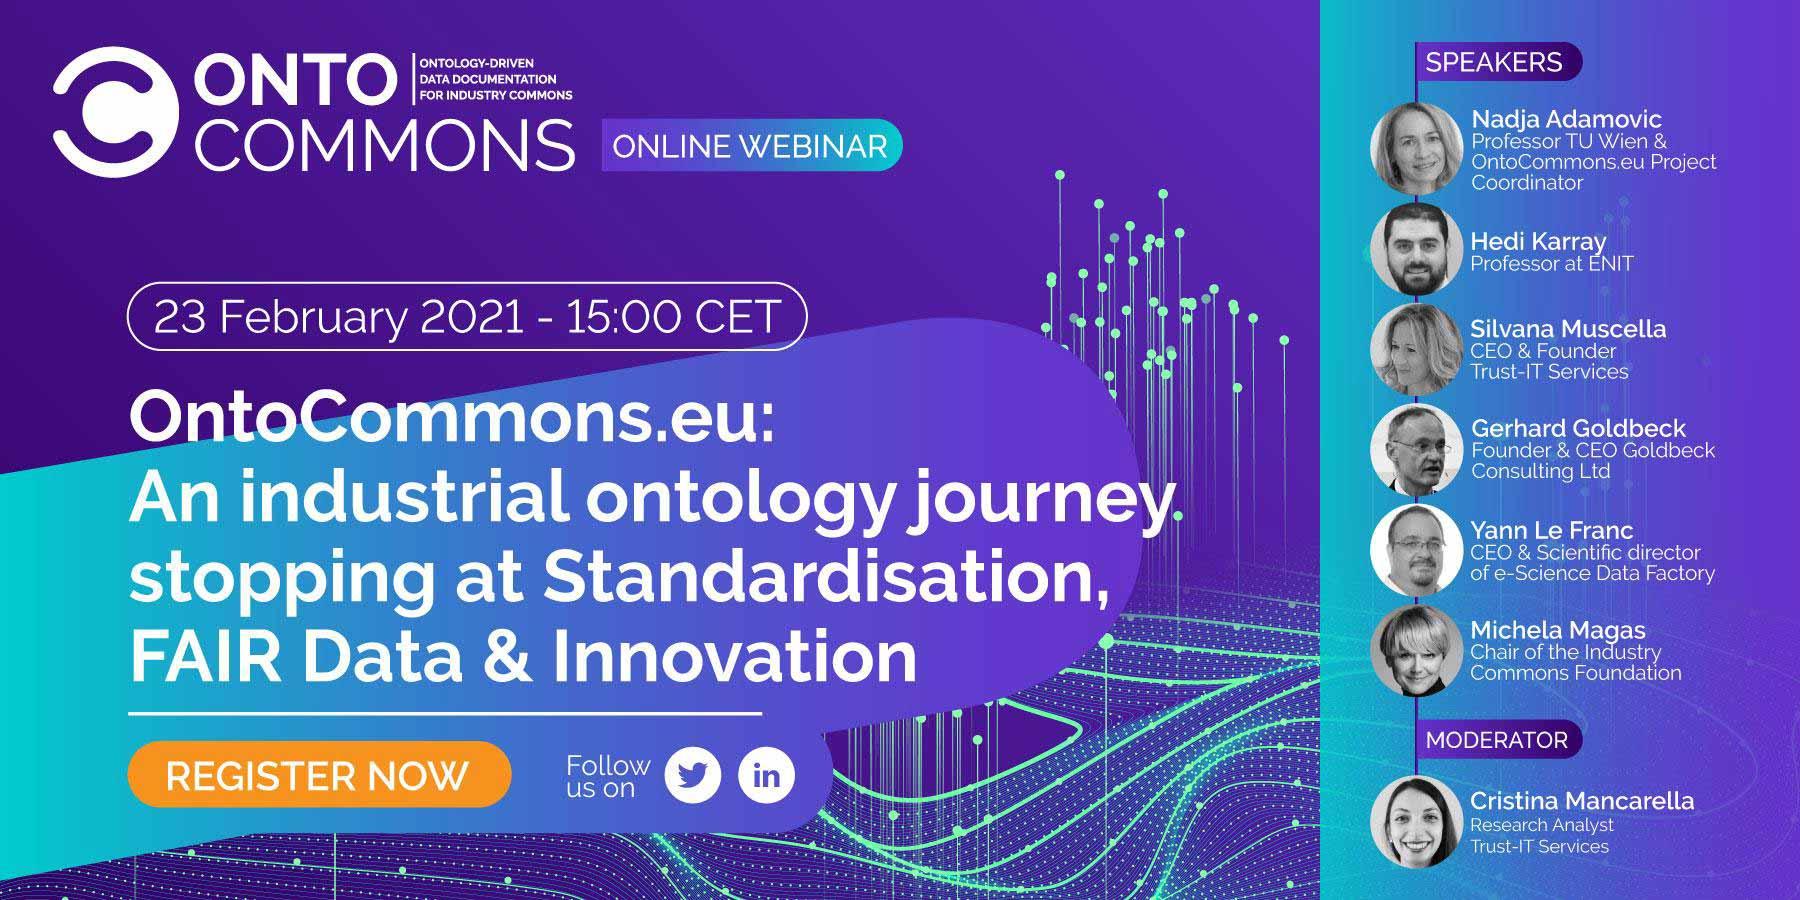 OntoCommons.eu: An industrial ontology journey stopping at Standardisation, FAIR Data & Innovation